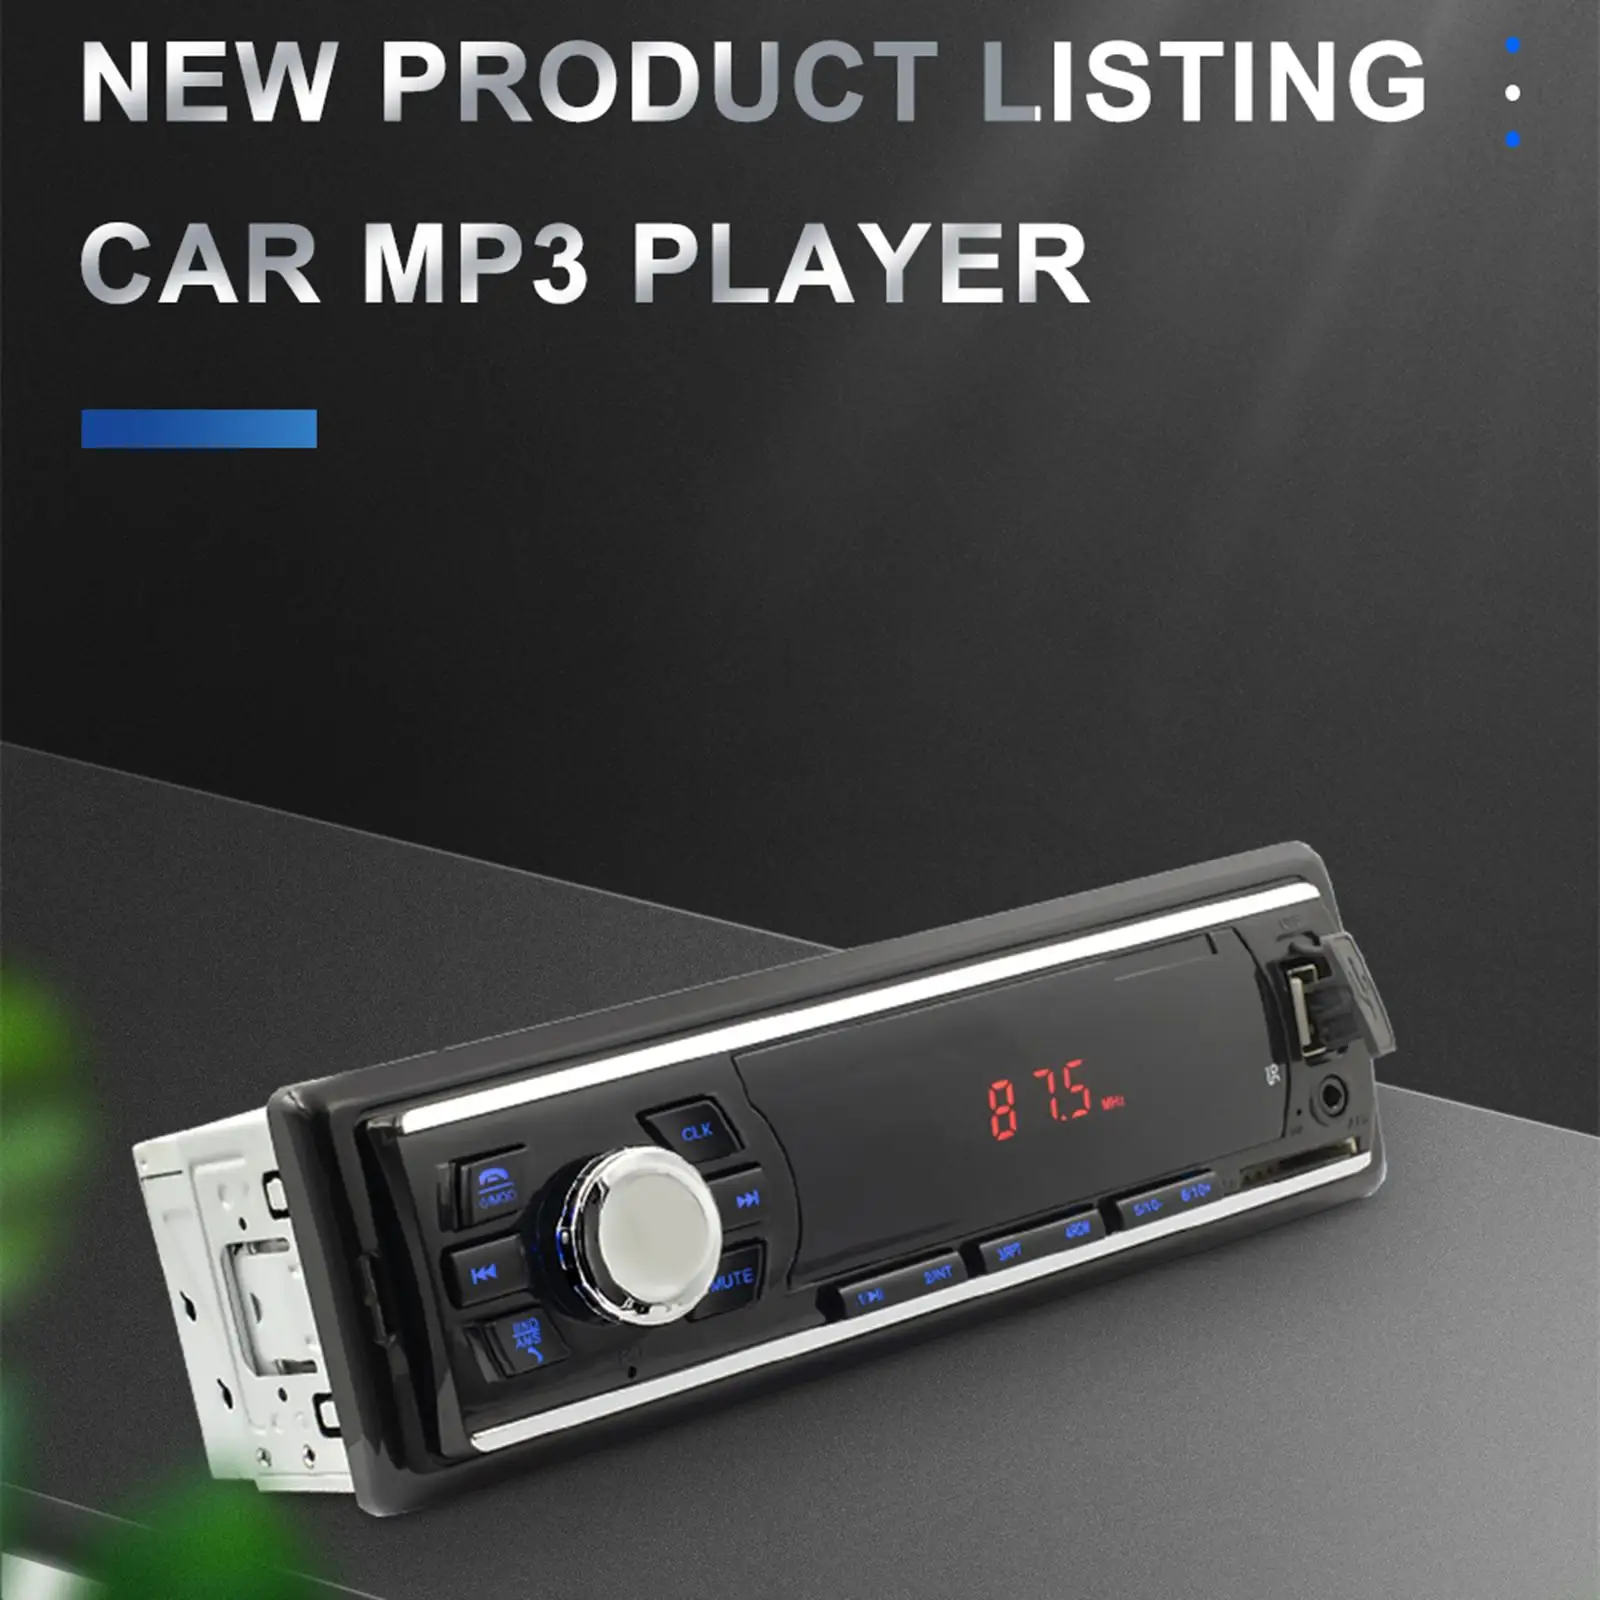 Car MP ,Receiver Built-in Microphone , ,Stereo Multimedia 12V